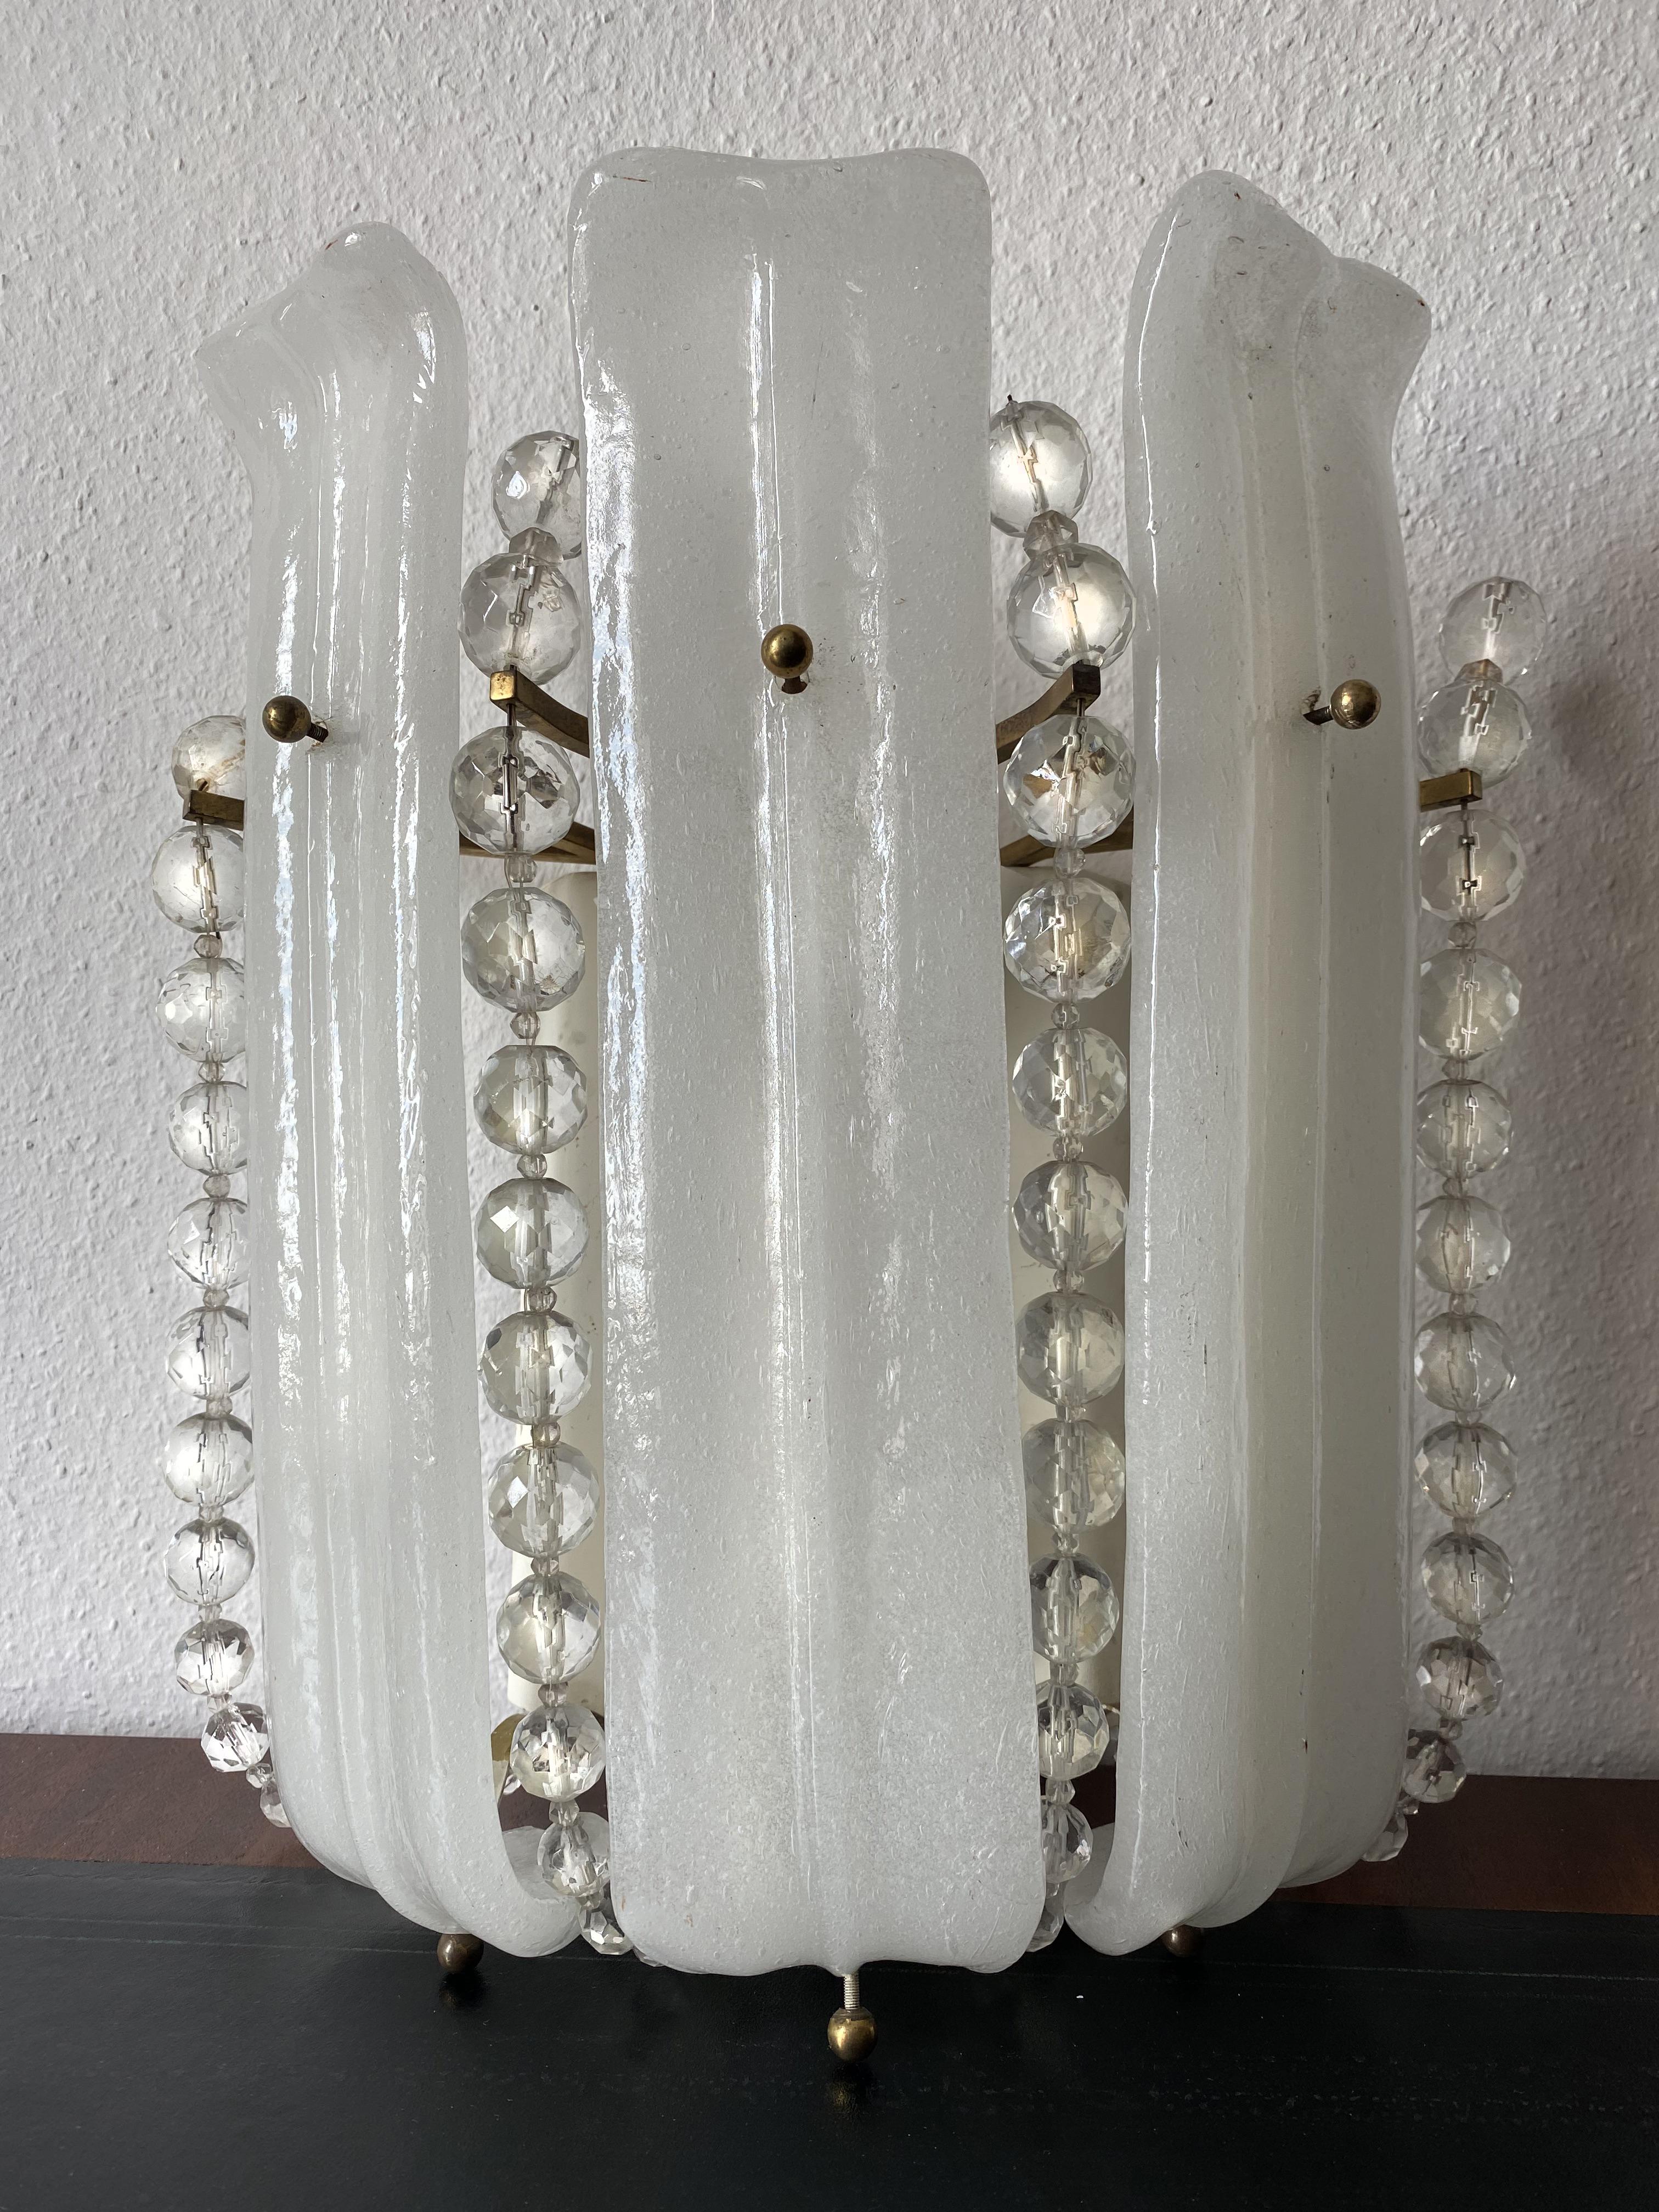 Each sconce is made up of three Pulegoso glass tongues interspersed with 4 necklaces of faceted glass. Pieces of absolute elegance.